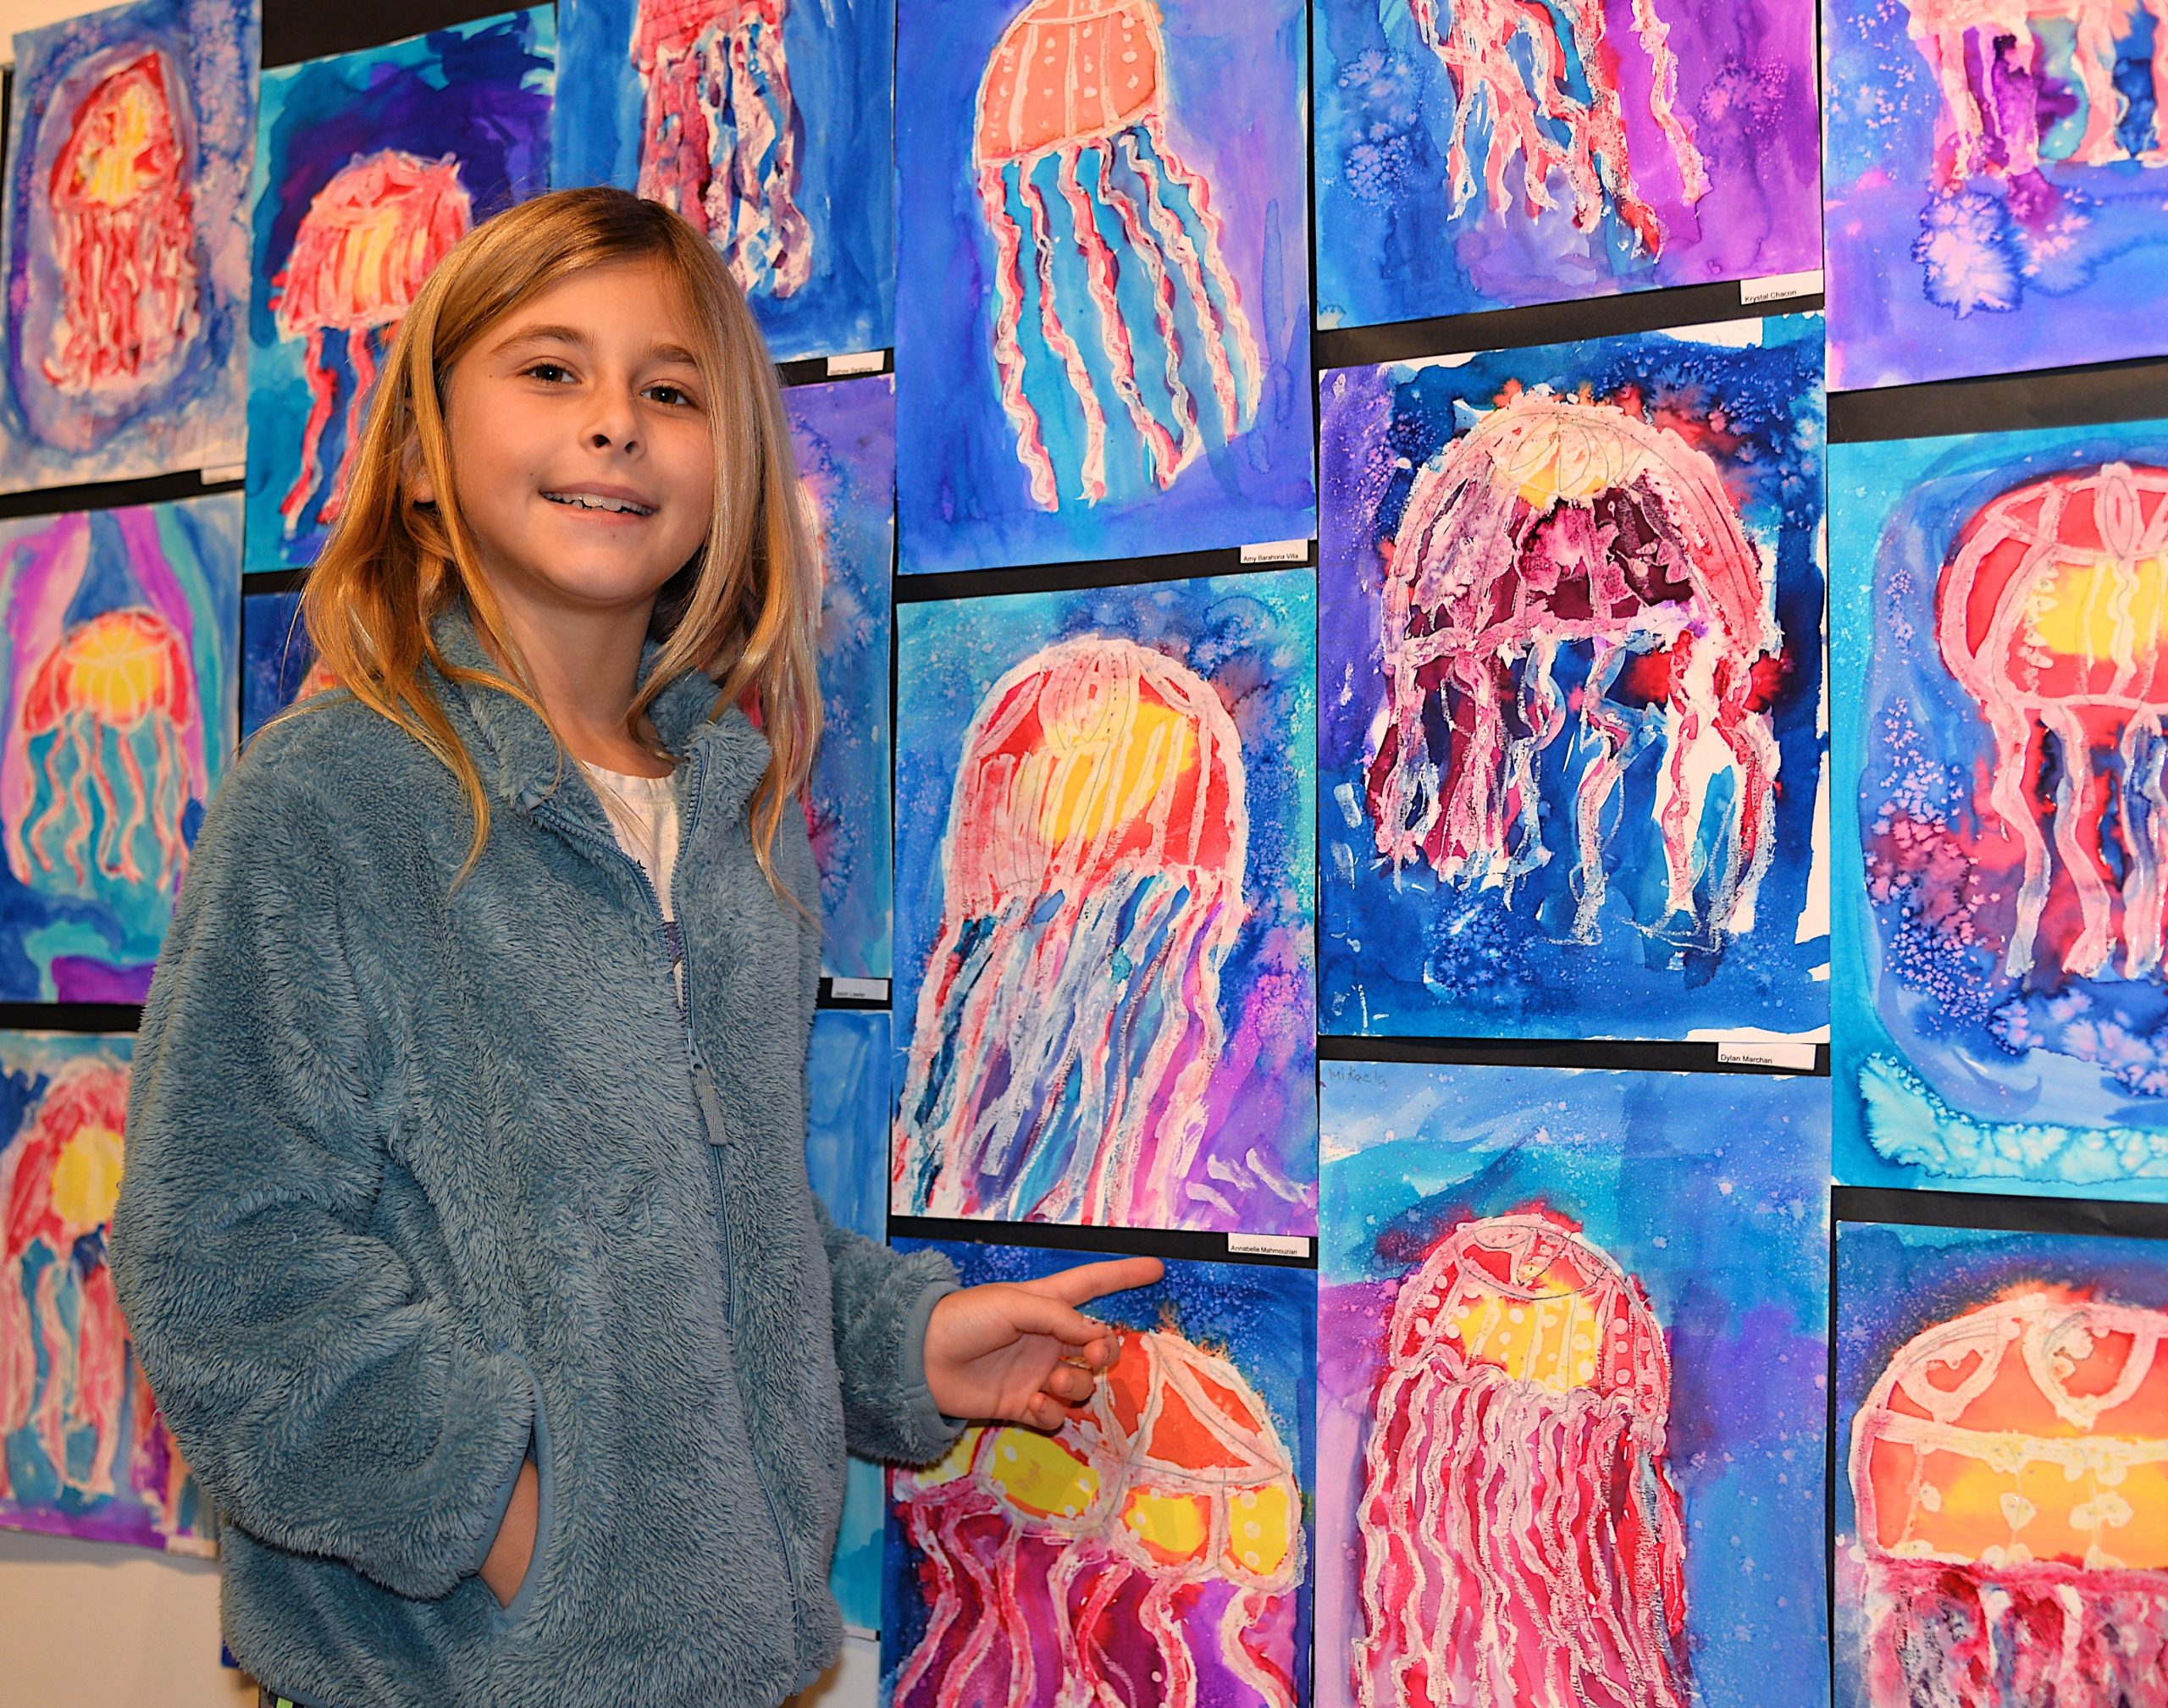 The Student Arts Festival opened at Guild Hall on Saturday with a reception. John Marshall Elementary School second-grader Annabelle Mahmouzian points to her work. KYRIL BROMLEY